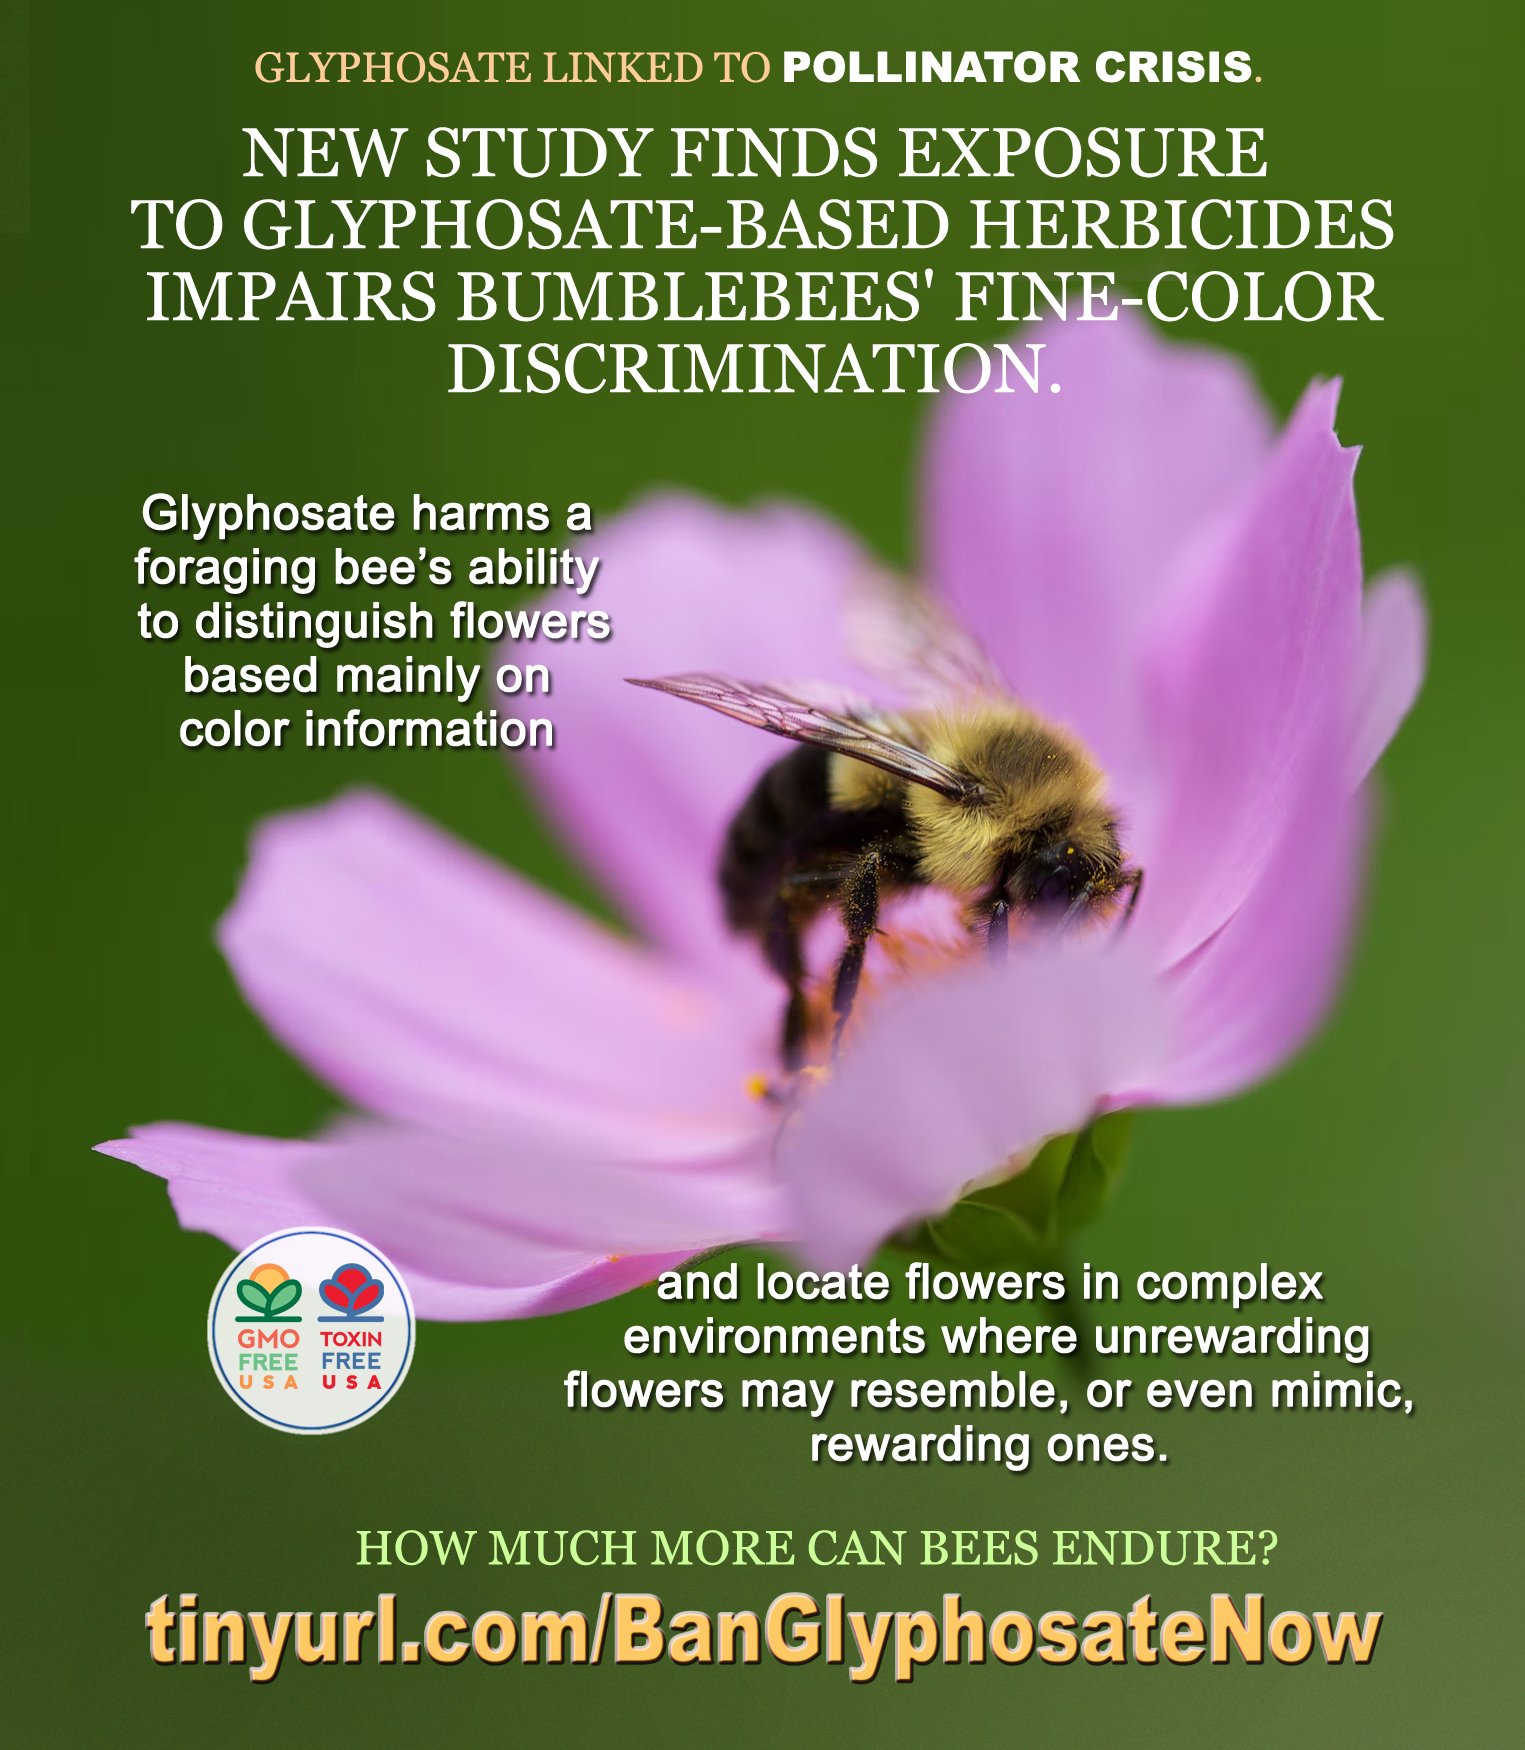 Study shows glyphosate impairs learning in bumblebees